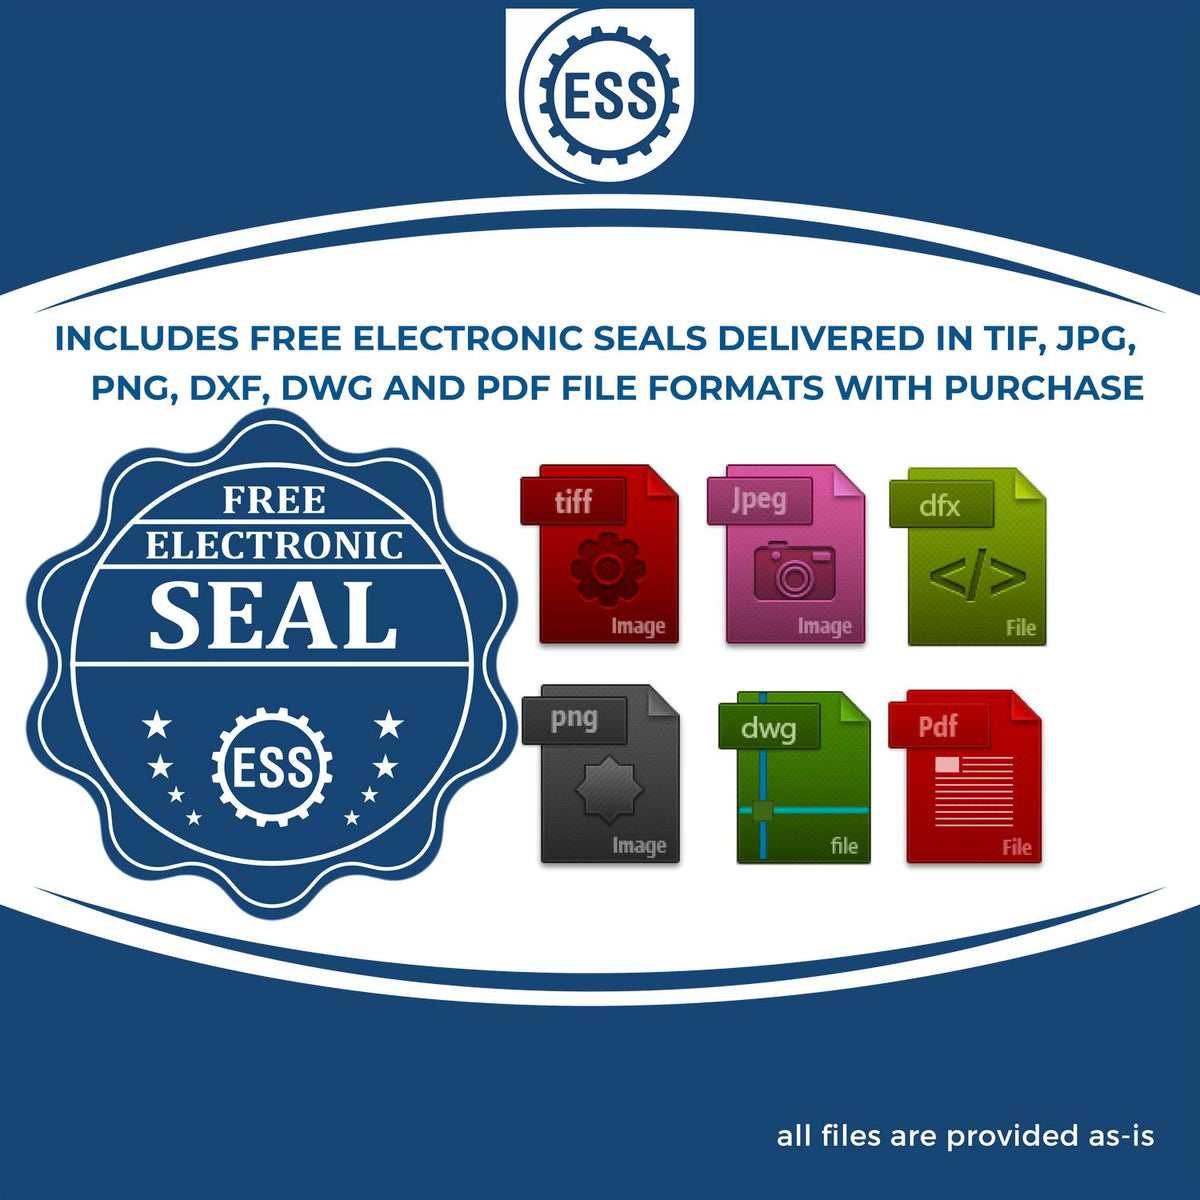 An infographic for the free electronic seal for the Slim Pre-Inked State Seal Notary Stamp for Connecticut illustrating the different file type icons such as DXF, DWG, TIF, JPG and PNG.